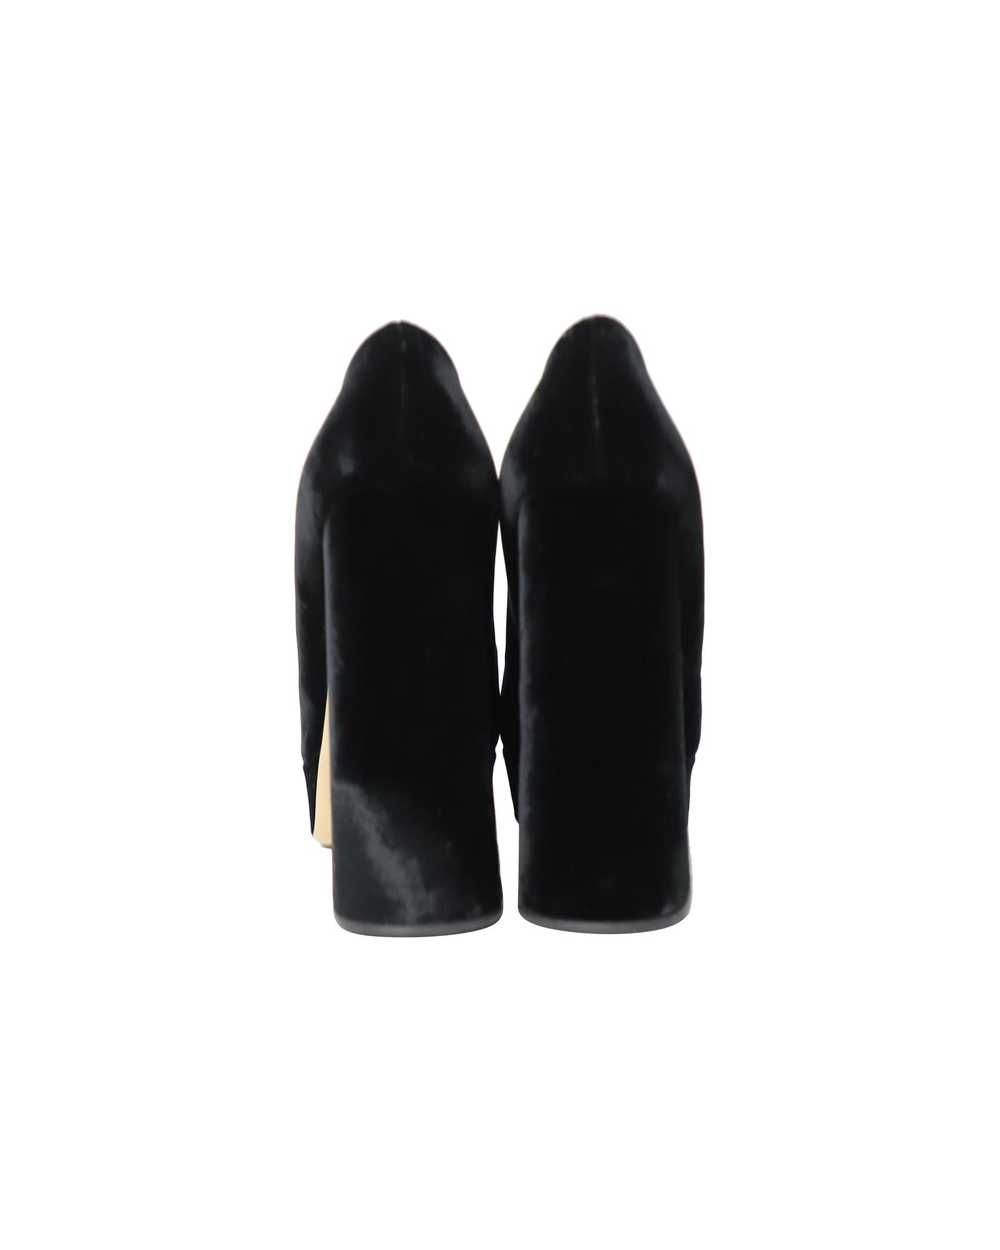 Product Details Chunky Pumps - image 3